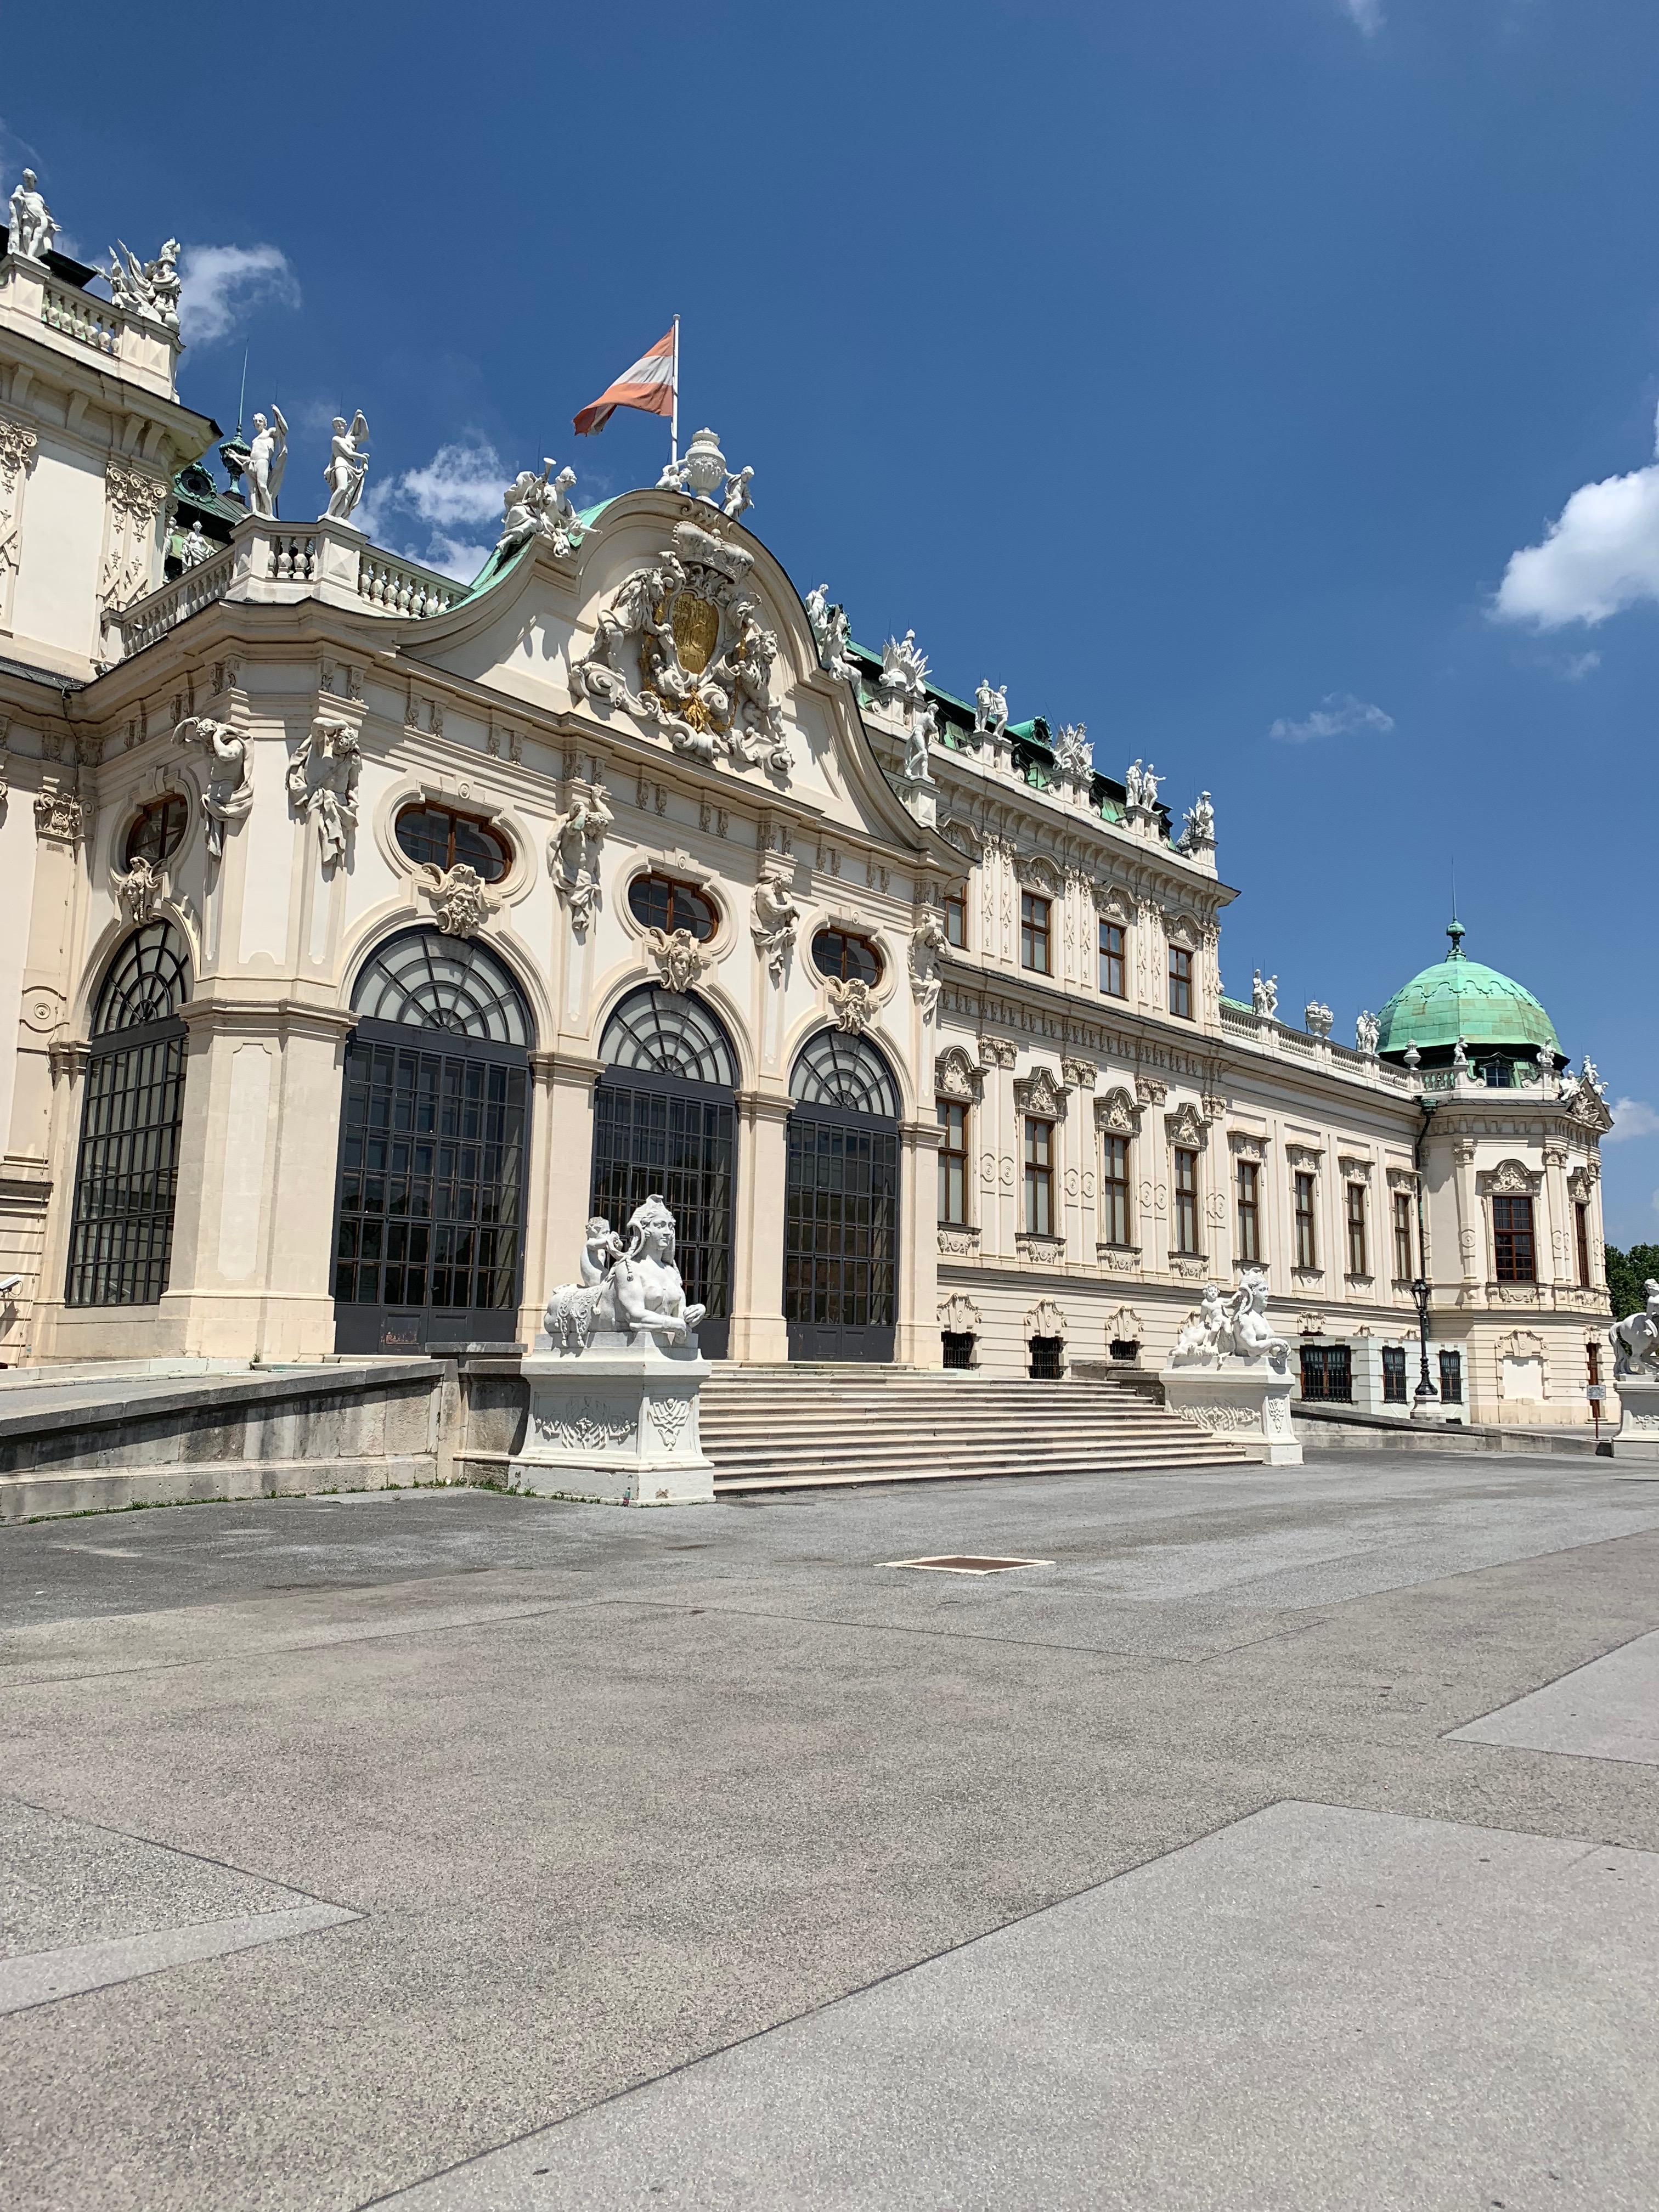 Upper Belvedere palace and exhibitions